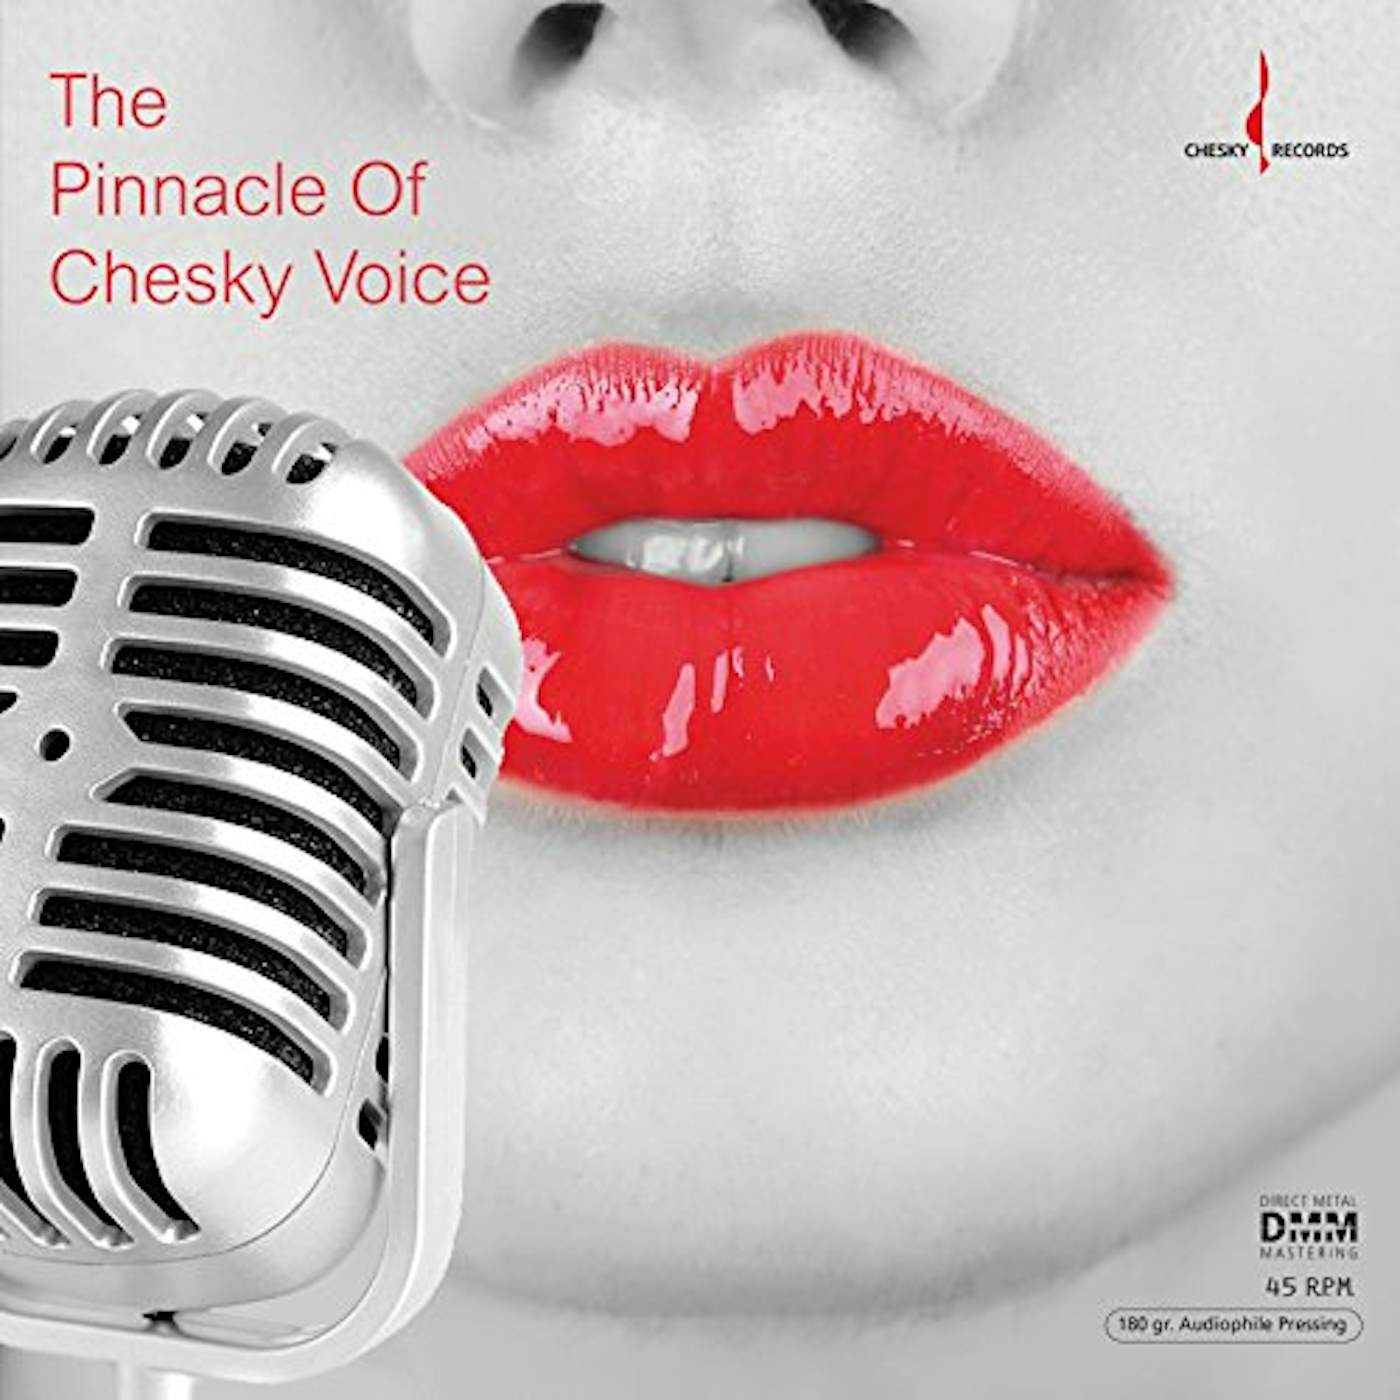 PINNACLE OF CHESKY VOICE / VARIOUS Vinyl Record